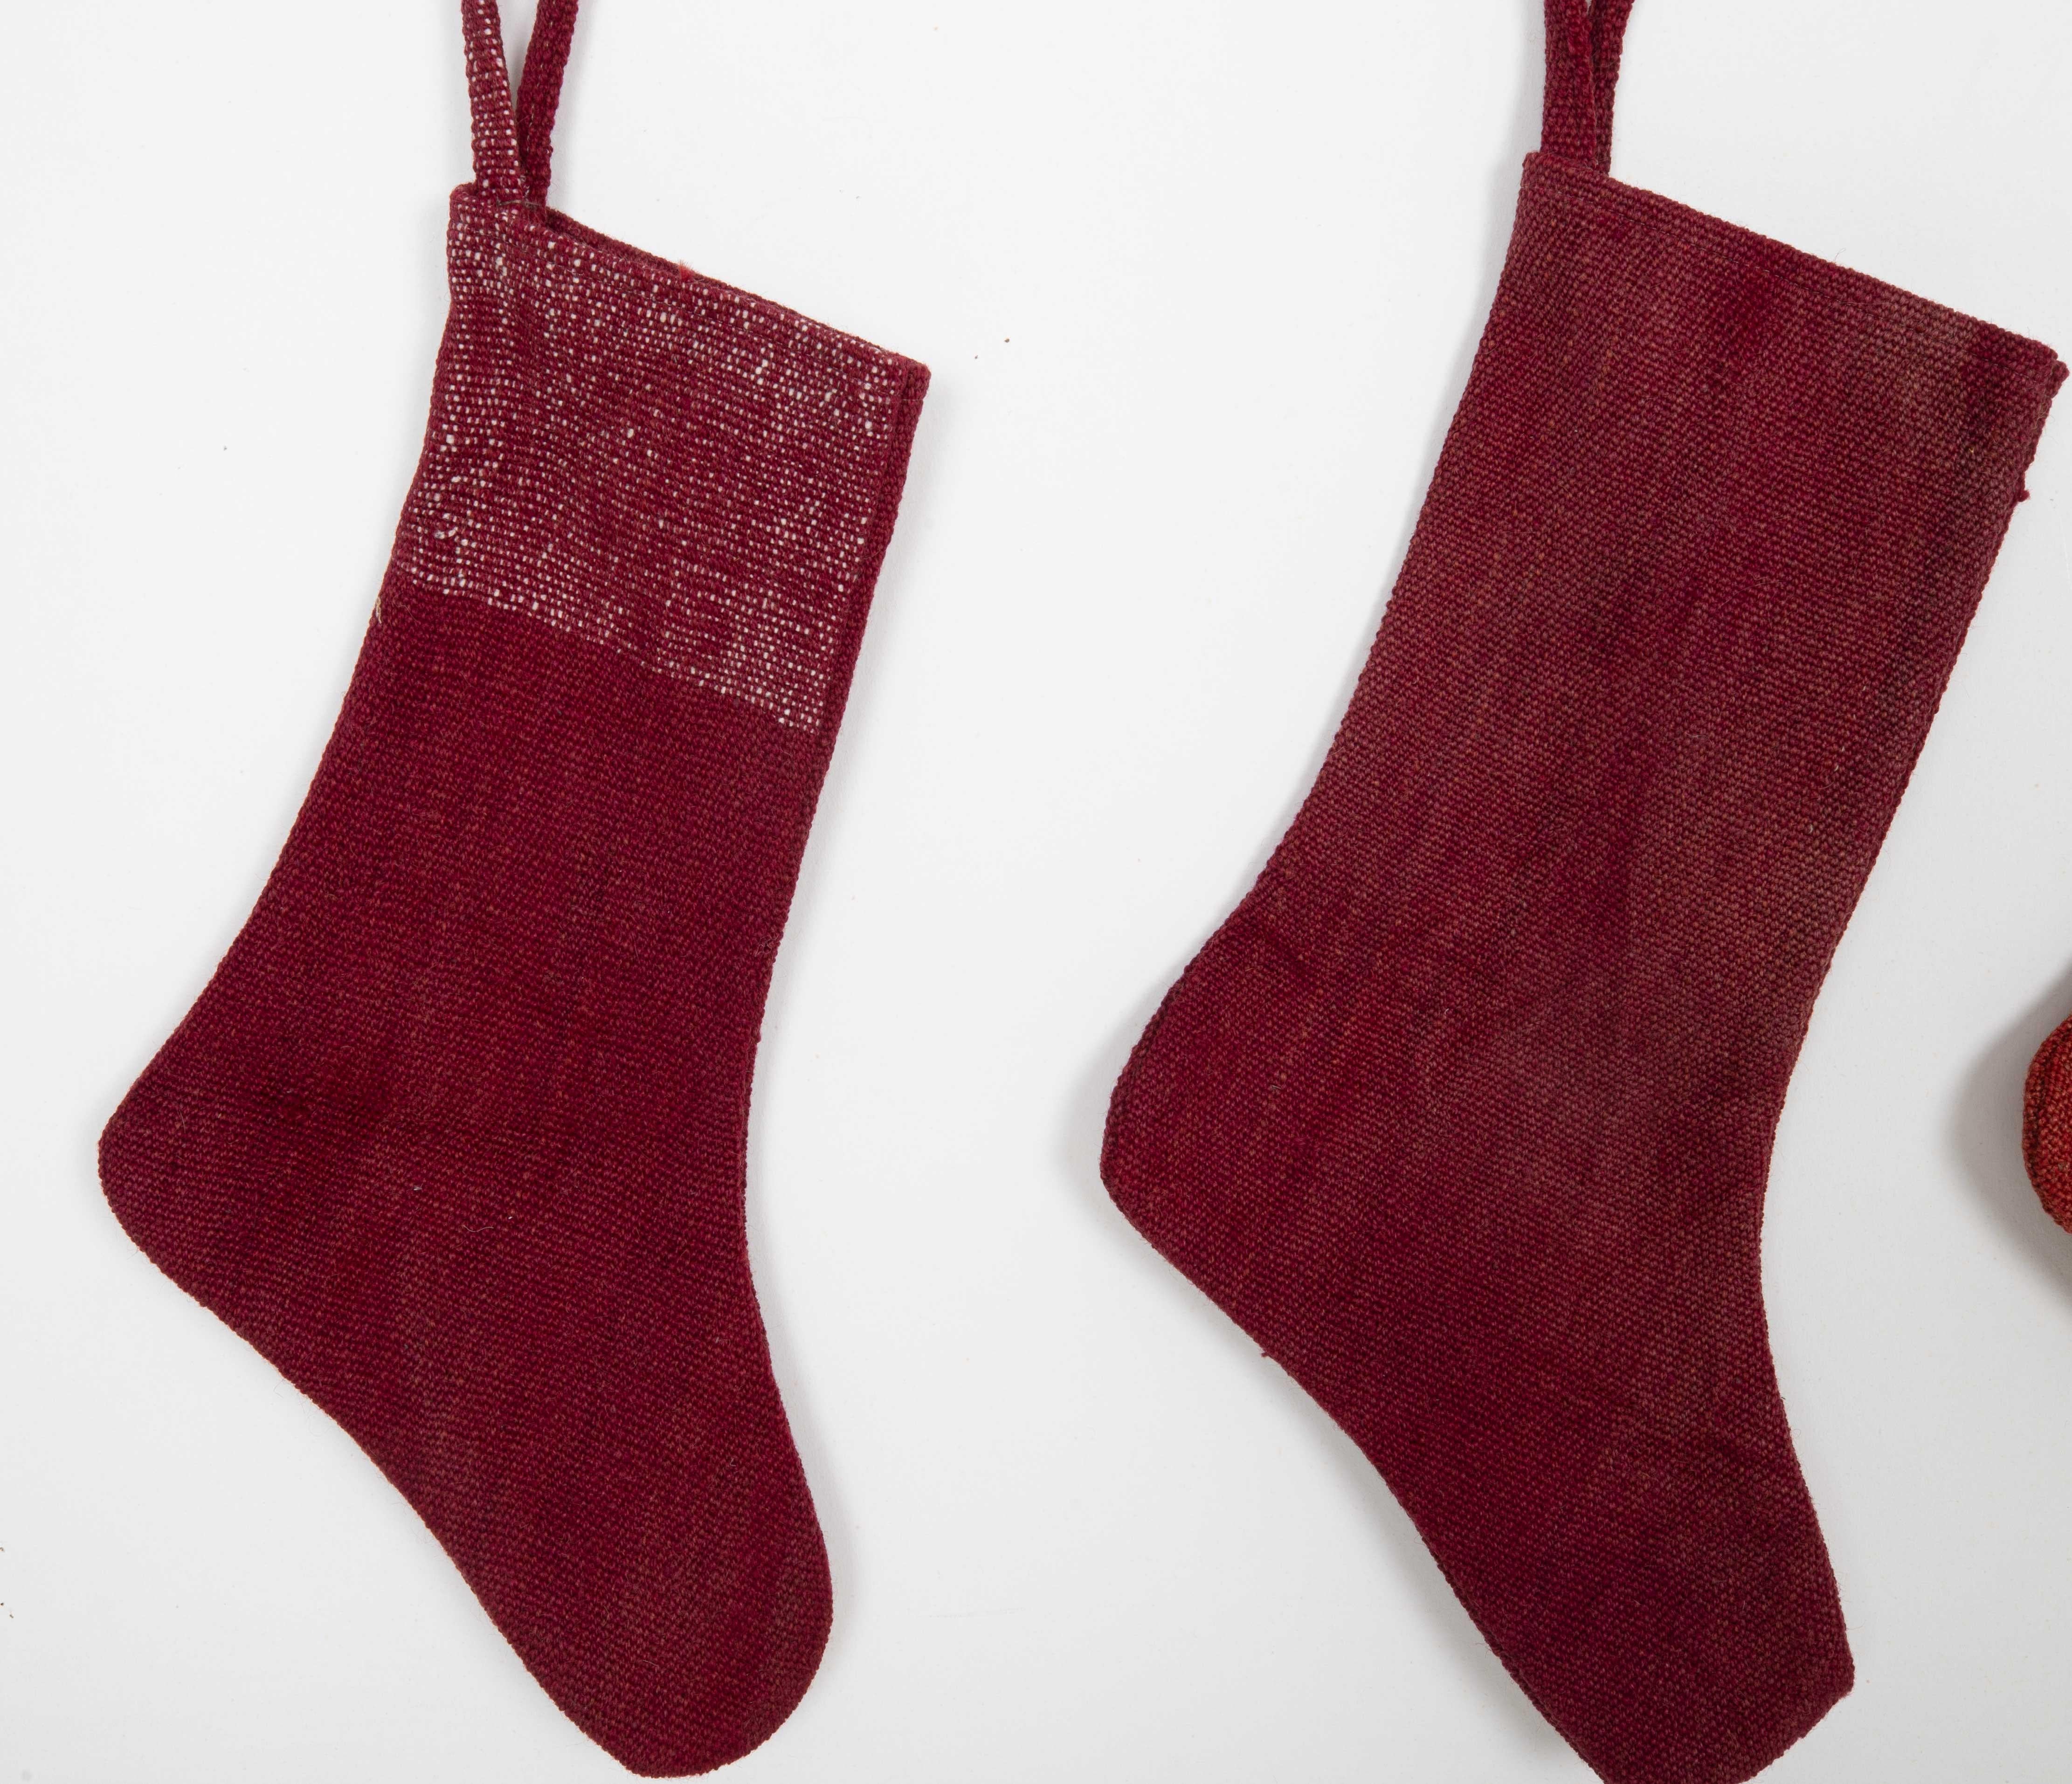 when were stockings invented